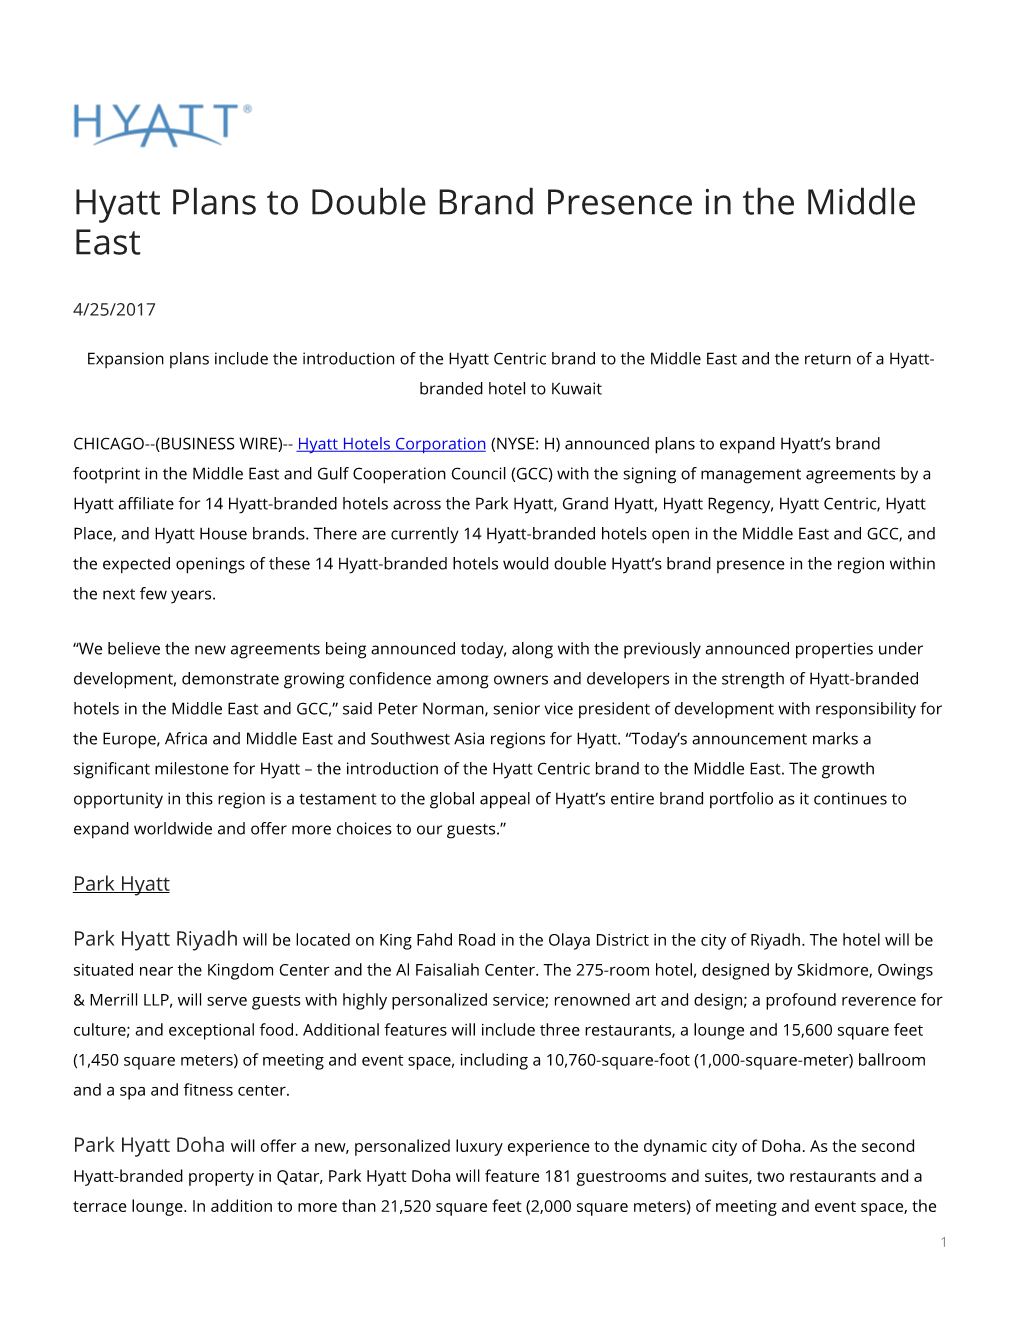 Hyatt Plans to Double Brand Presence in the Middle East